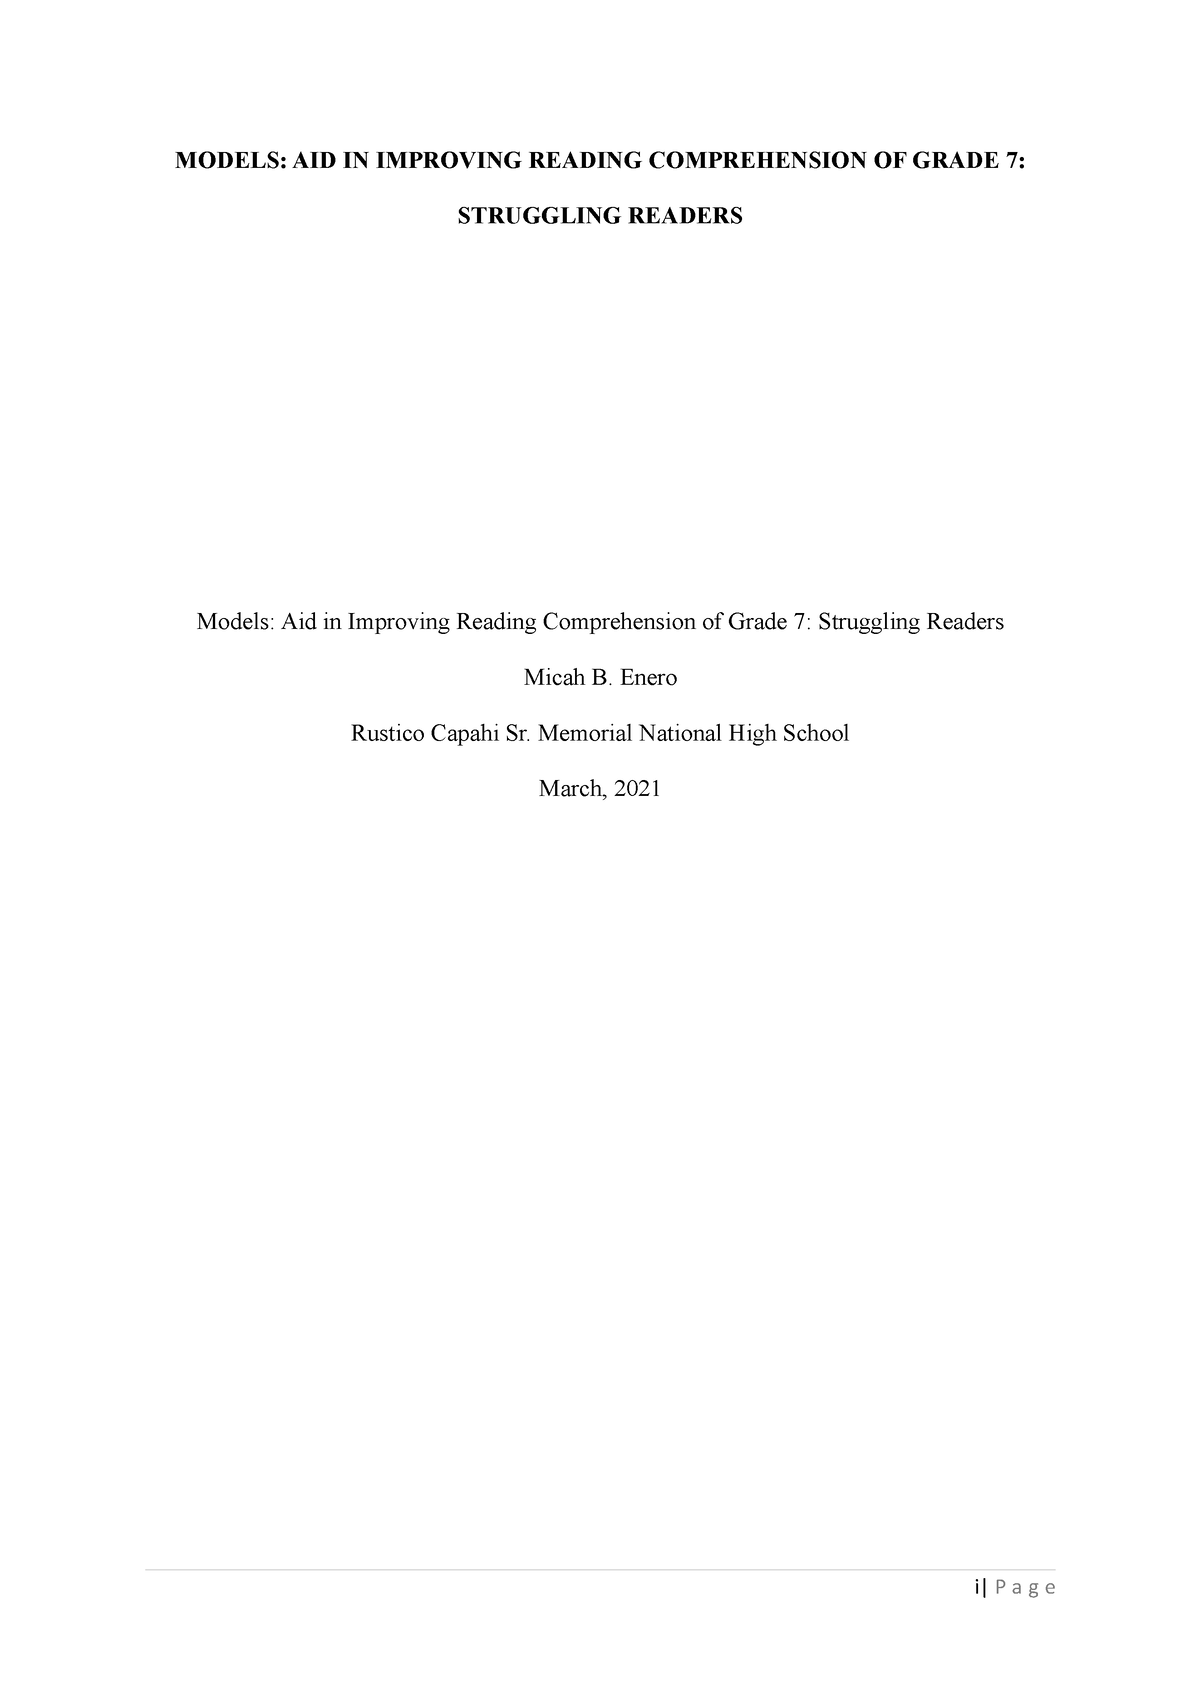 reading comprehension research proposal pdf